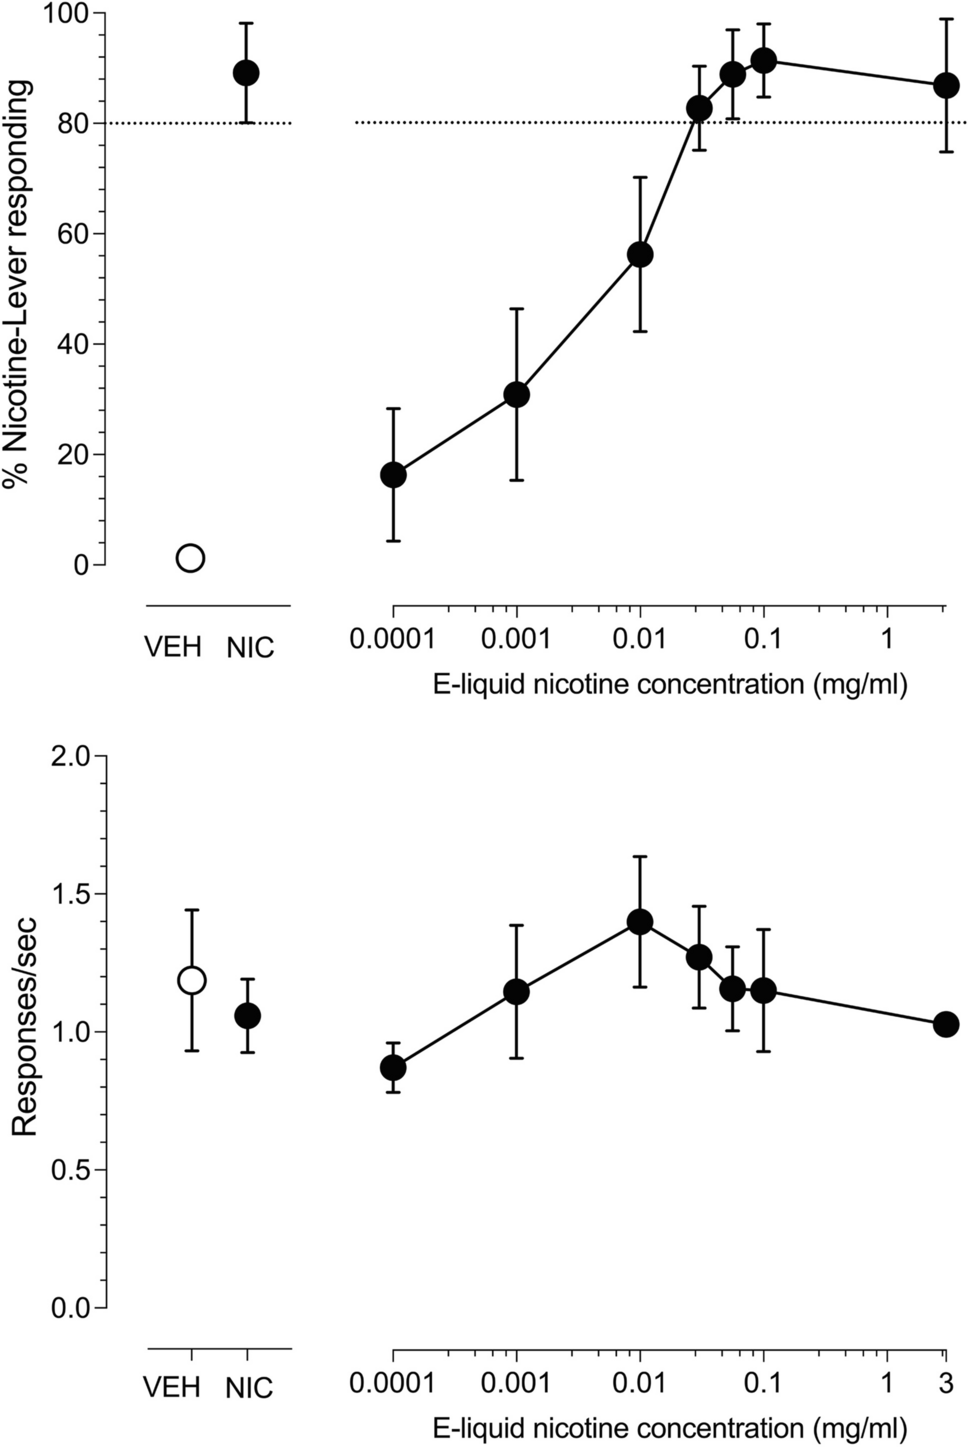 Stimulus mediation, specificity and impact of menthol in rats trained to discriminate puffs of nicotine e-cigarette aerosol from nicotine-free aerosol